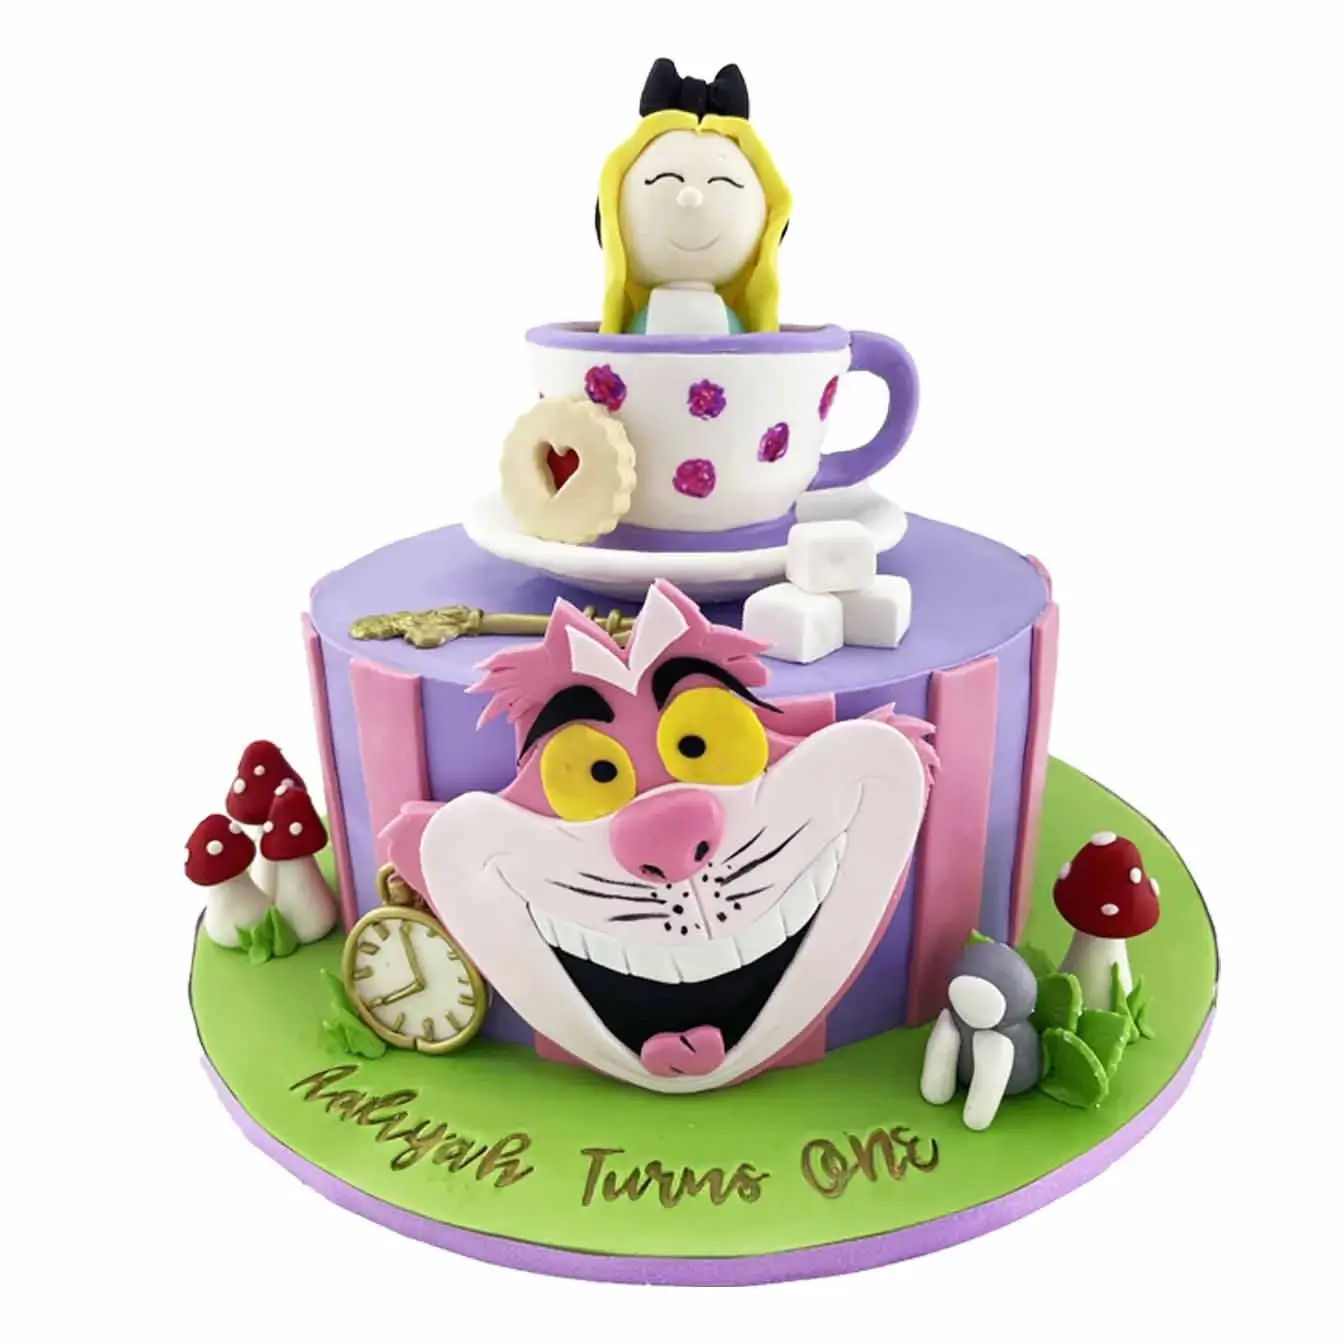 Alice in Wonderland-themed cake with Alice in a teacup, Cheshire Cat stripes, and mini toadstools and biscuits